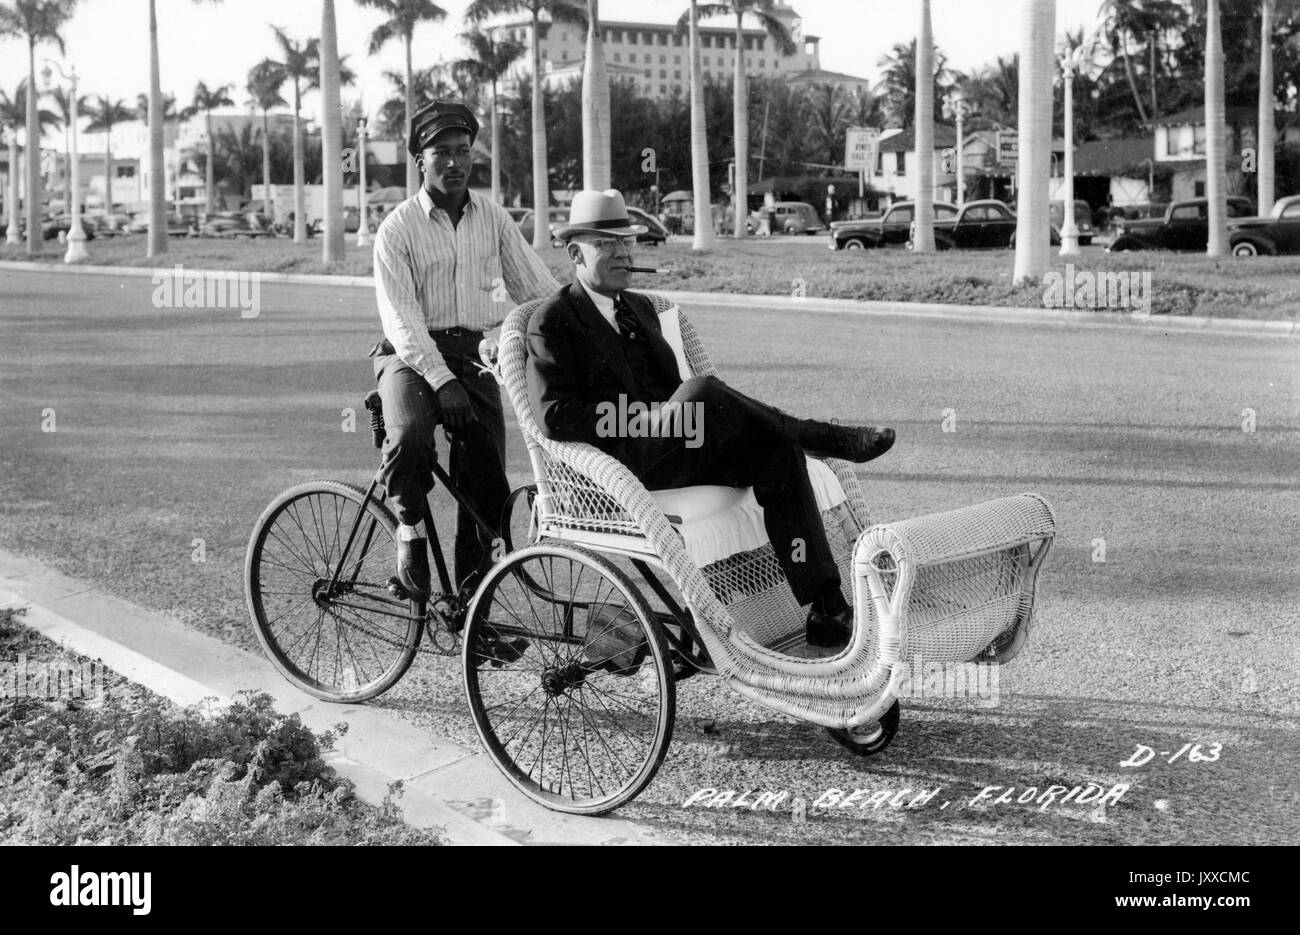 Full Body portrait of an African American man on a rickshaw pushing a mature white man wearing a dark suit white suit and a hat, with a cigar in his mouth, the and African American man is wearing a striped shirt and a dark hat, pushing the man on the grass by palm trees in Palm Beach, Florida, 1929. Stock Photo